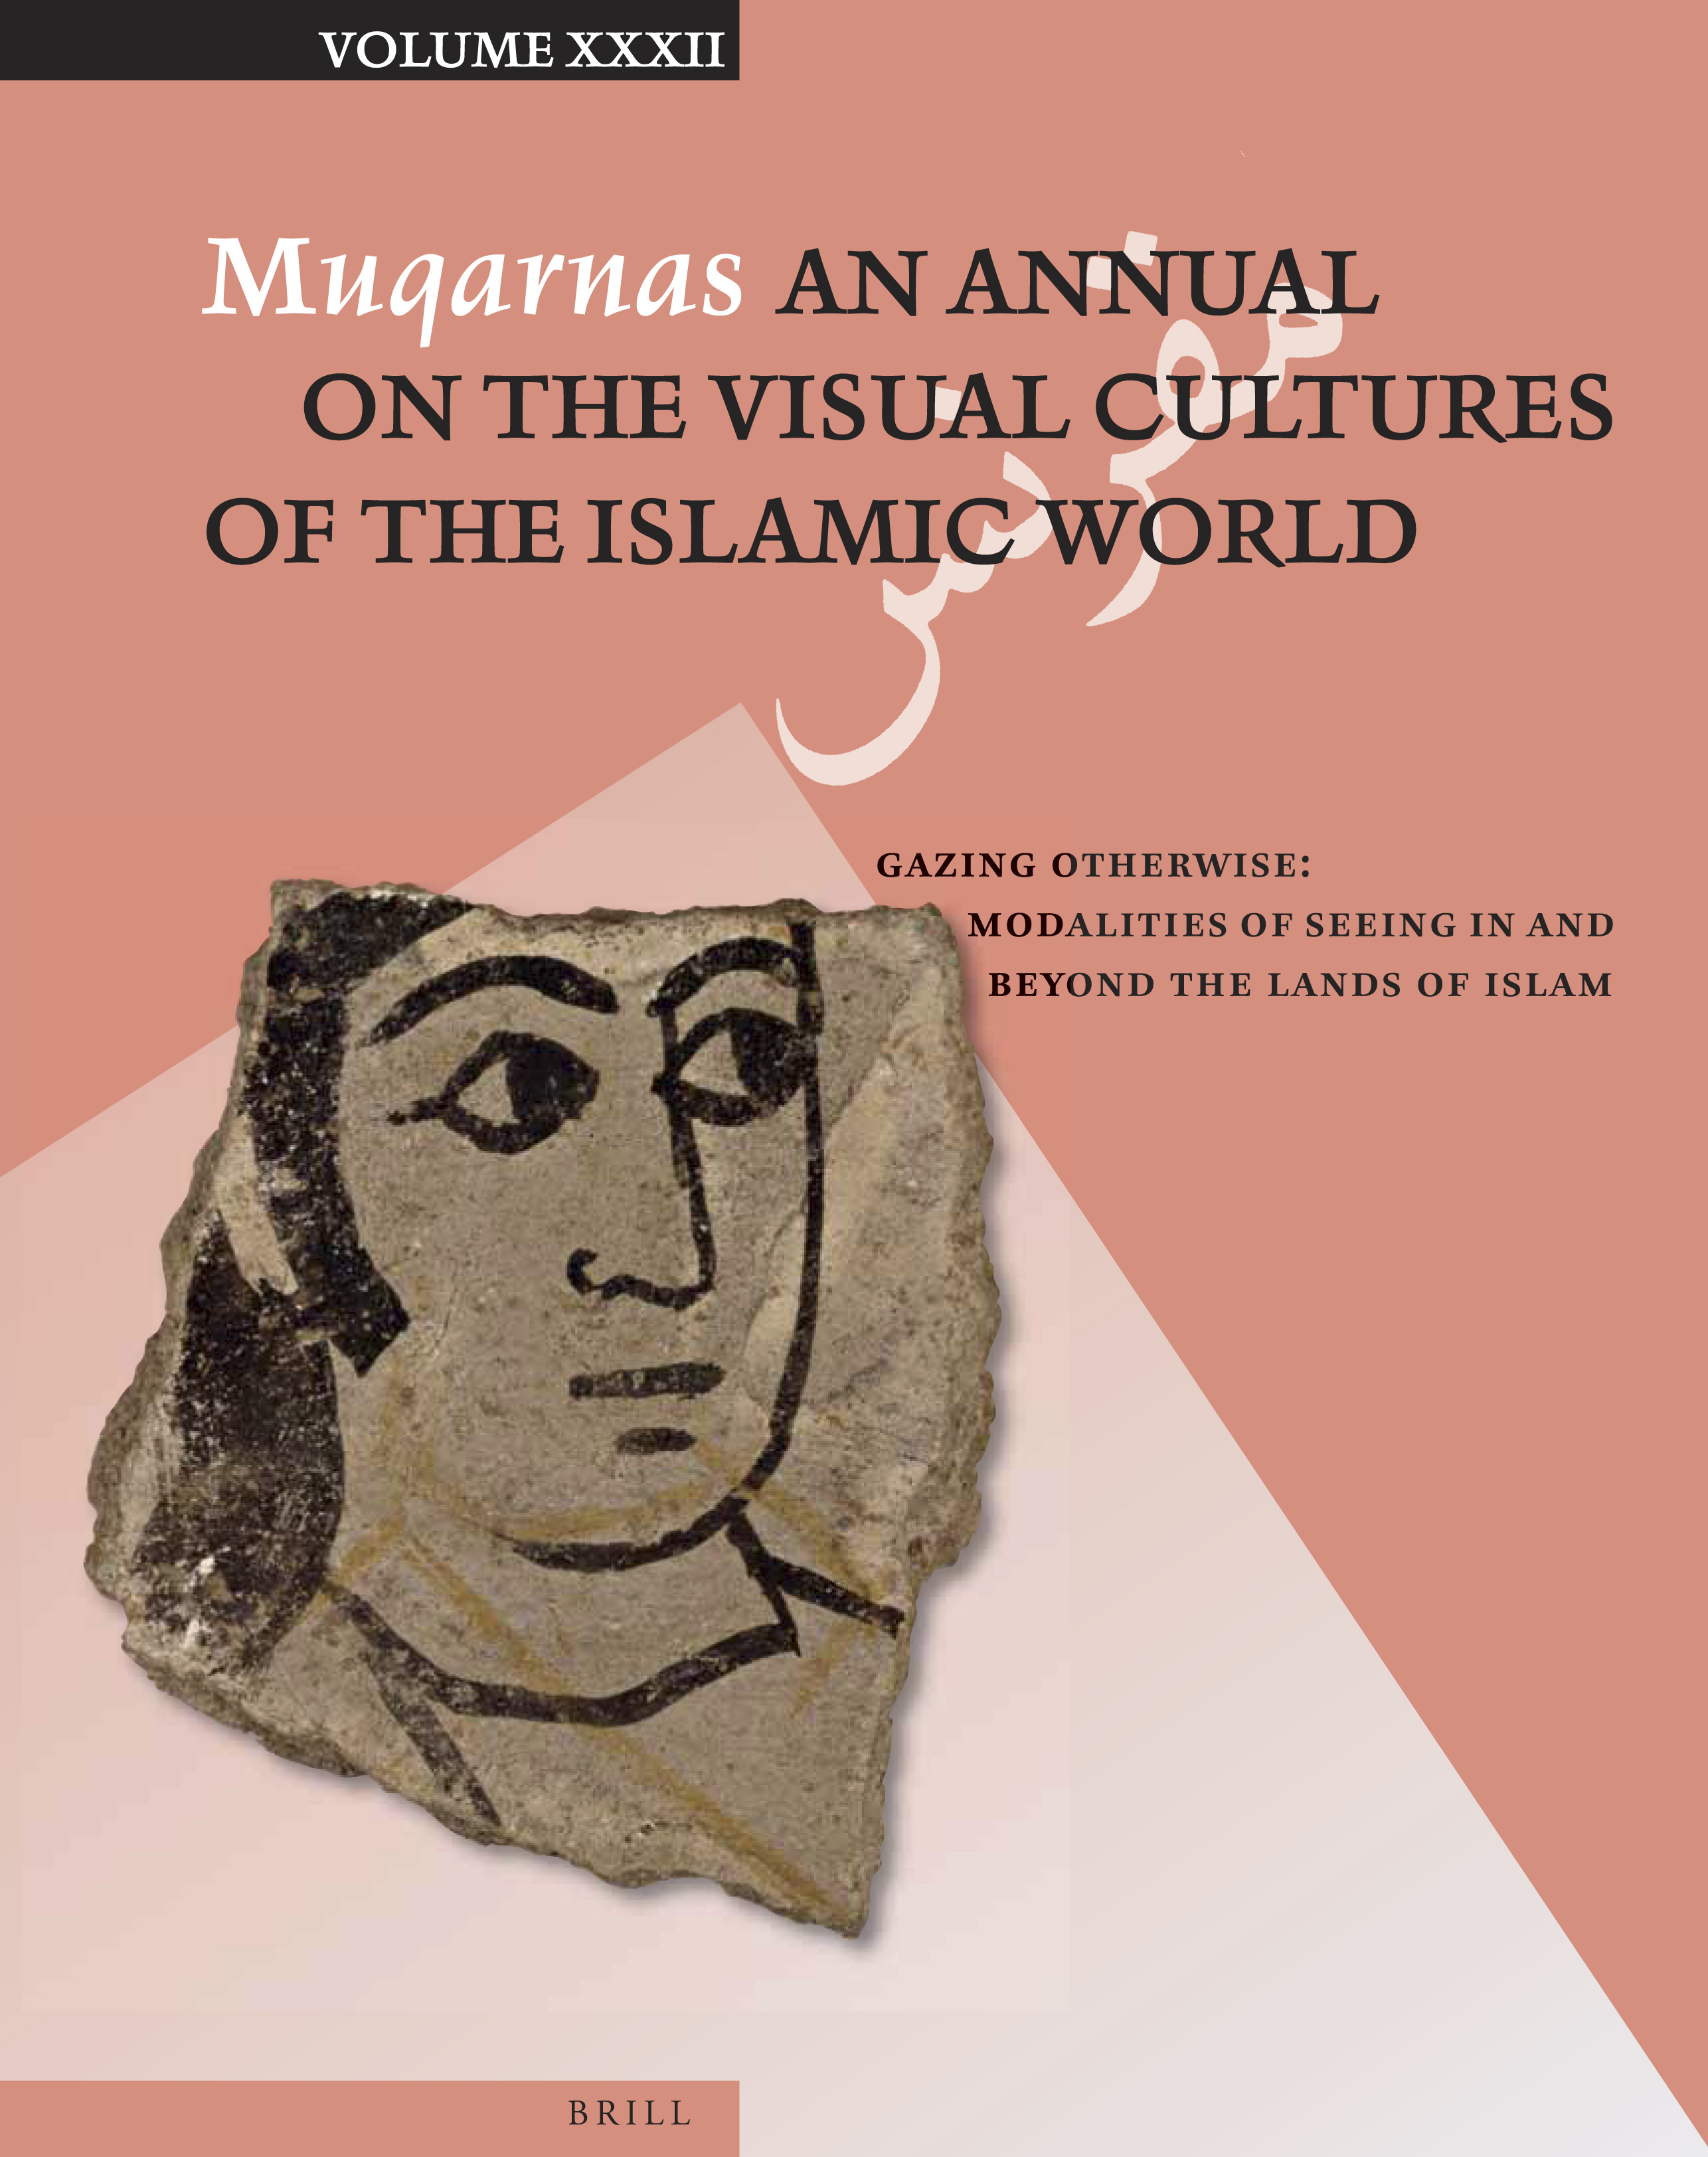 Muqarnas Volume XXXII: An Annual on the Visual Cultures of the Islamic World